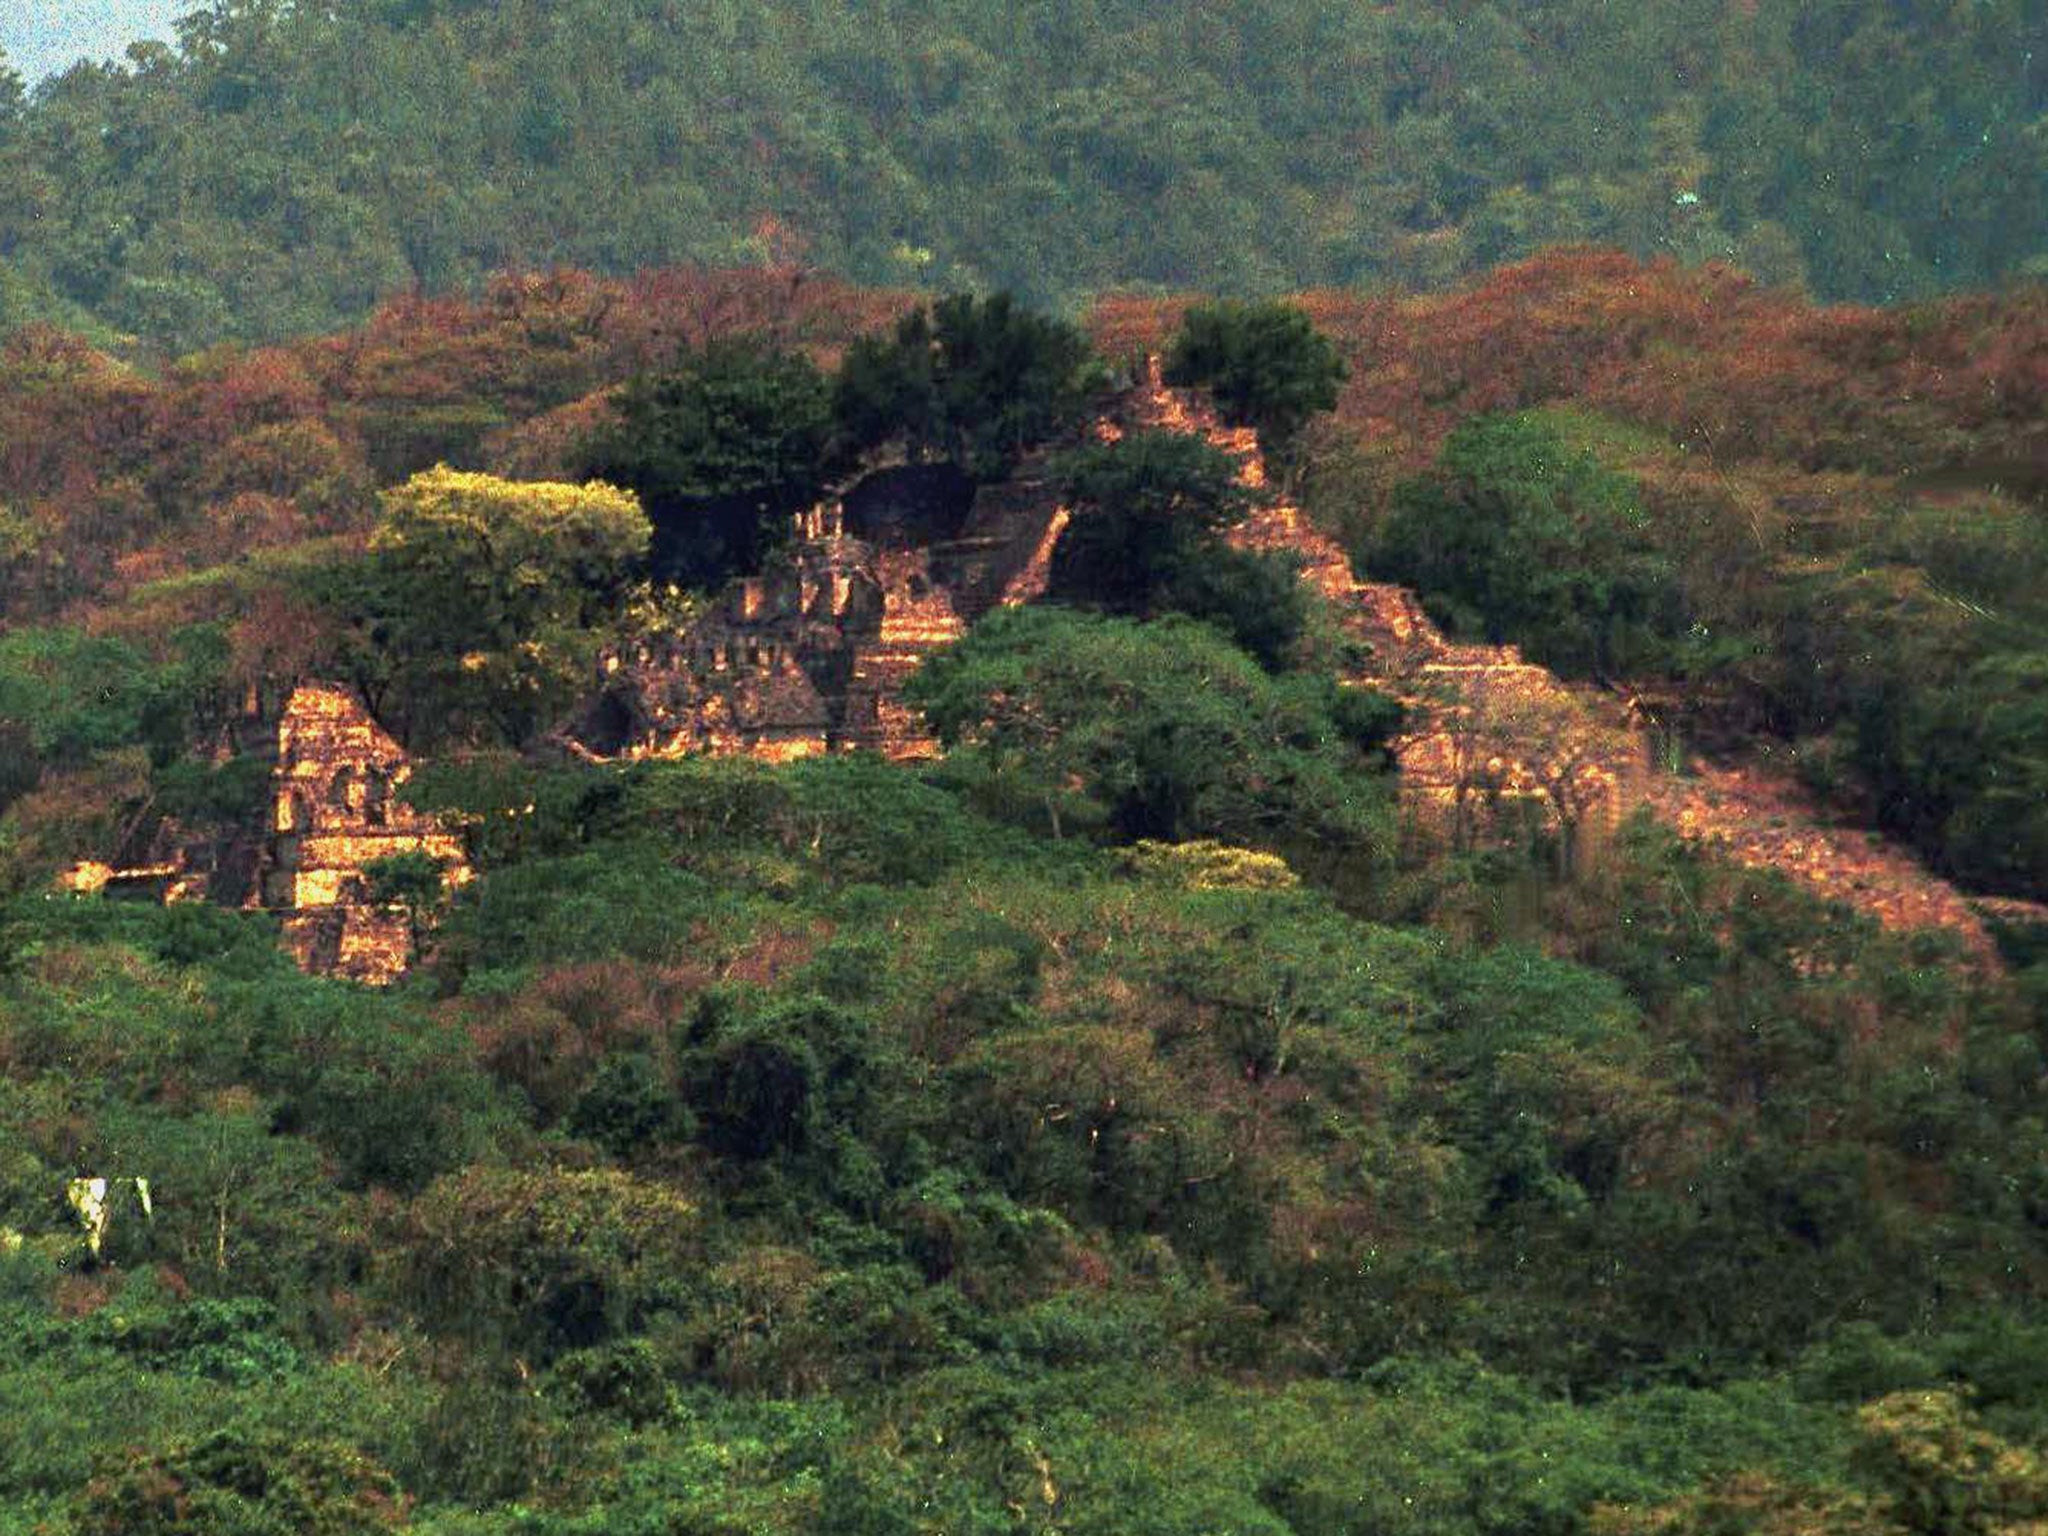 View of the ancient 'Valley of the Warriors' in Chiapas, Southern Mexico, which has recently been shown to be the largest pyramidal acropolis in Mesoamerica